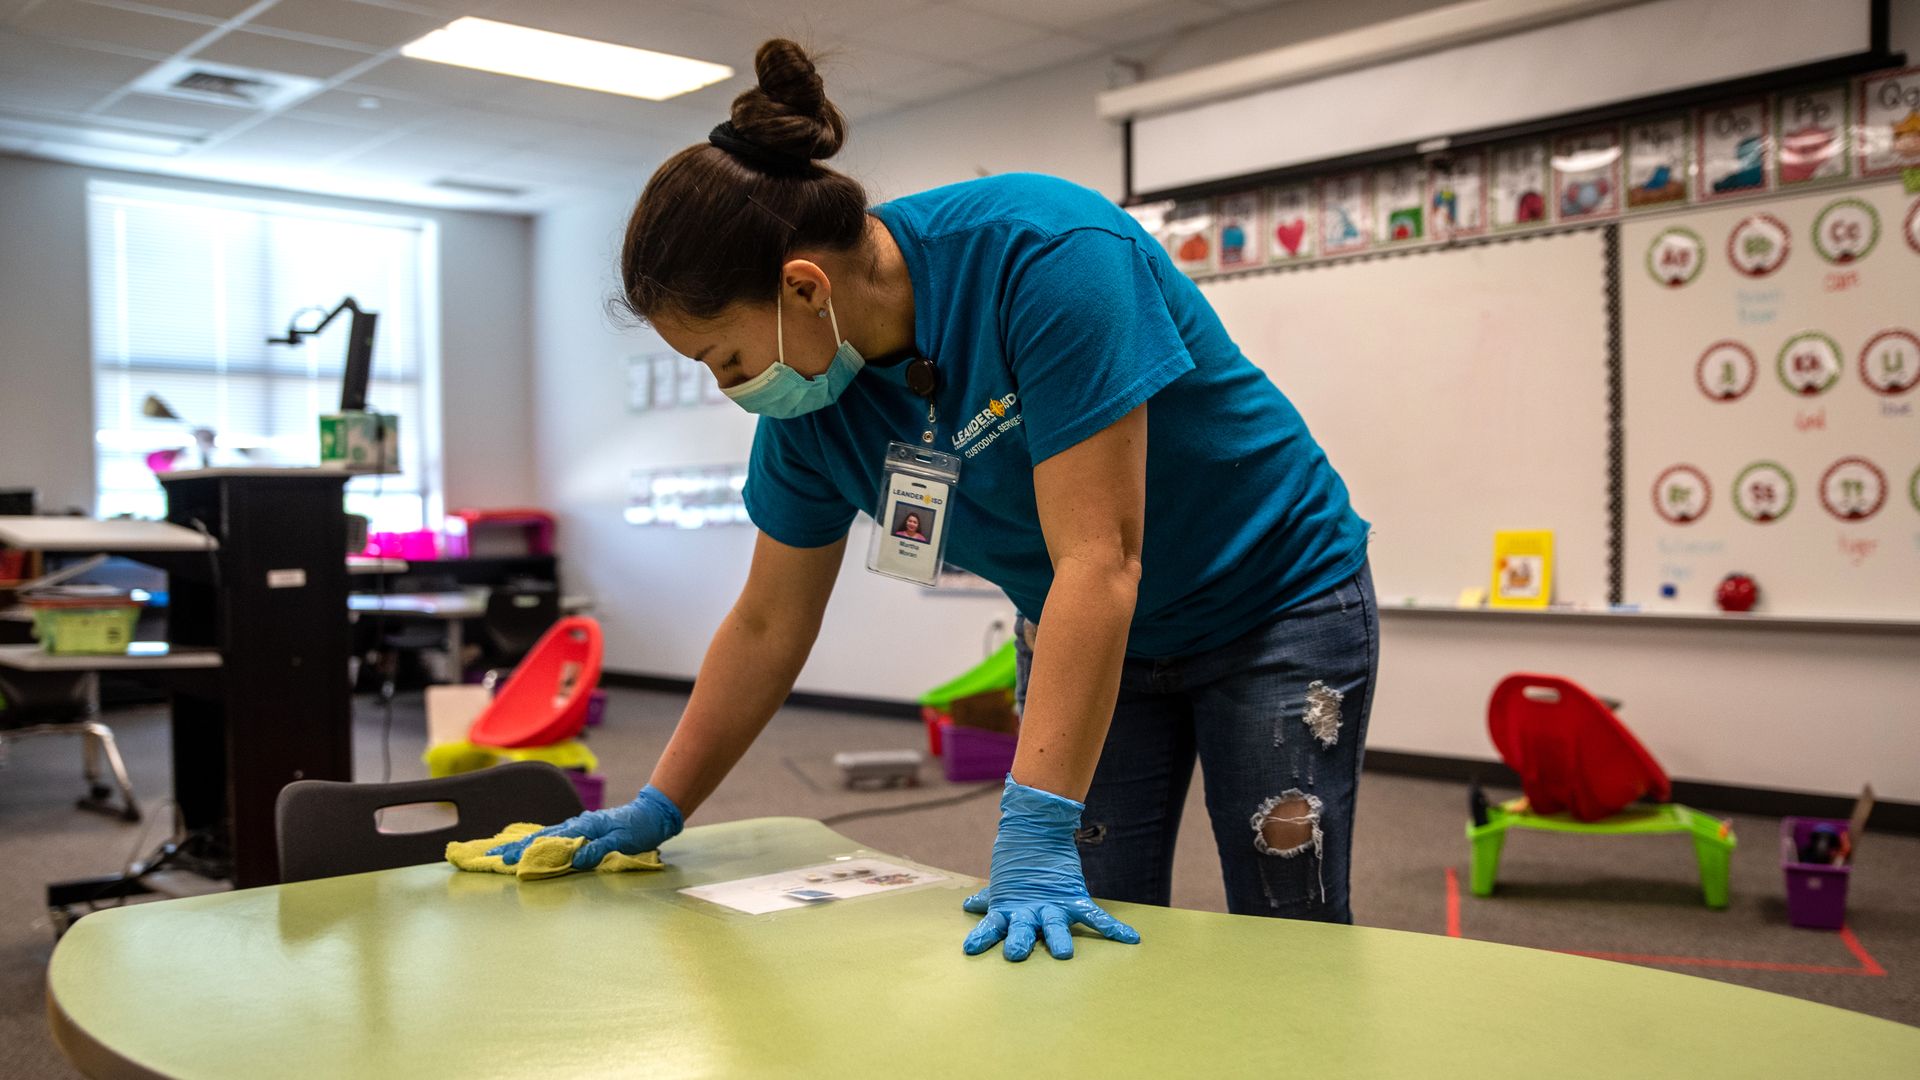 A worker cleans a desk in a classroom.